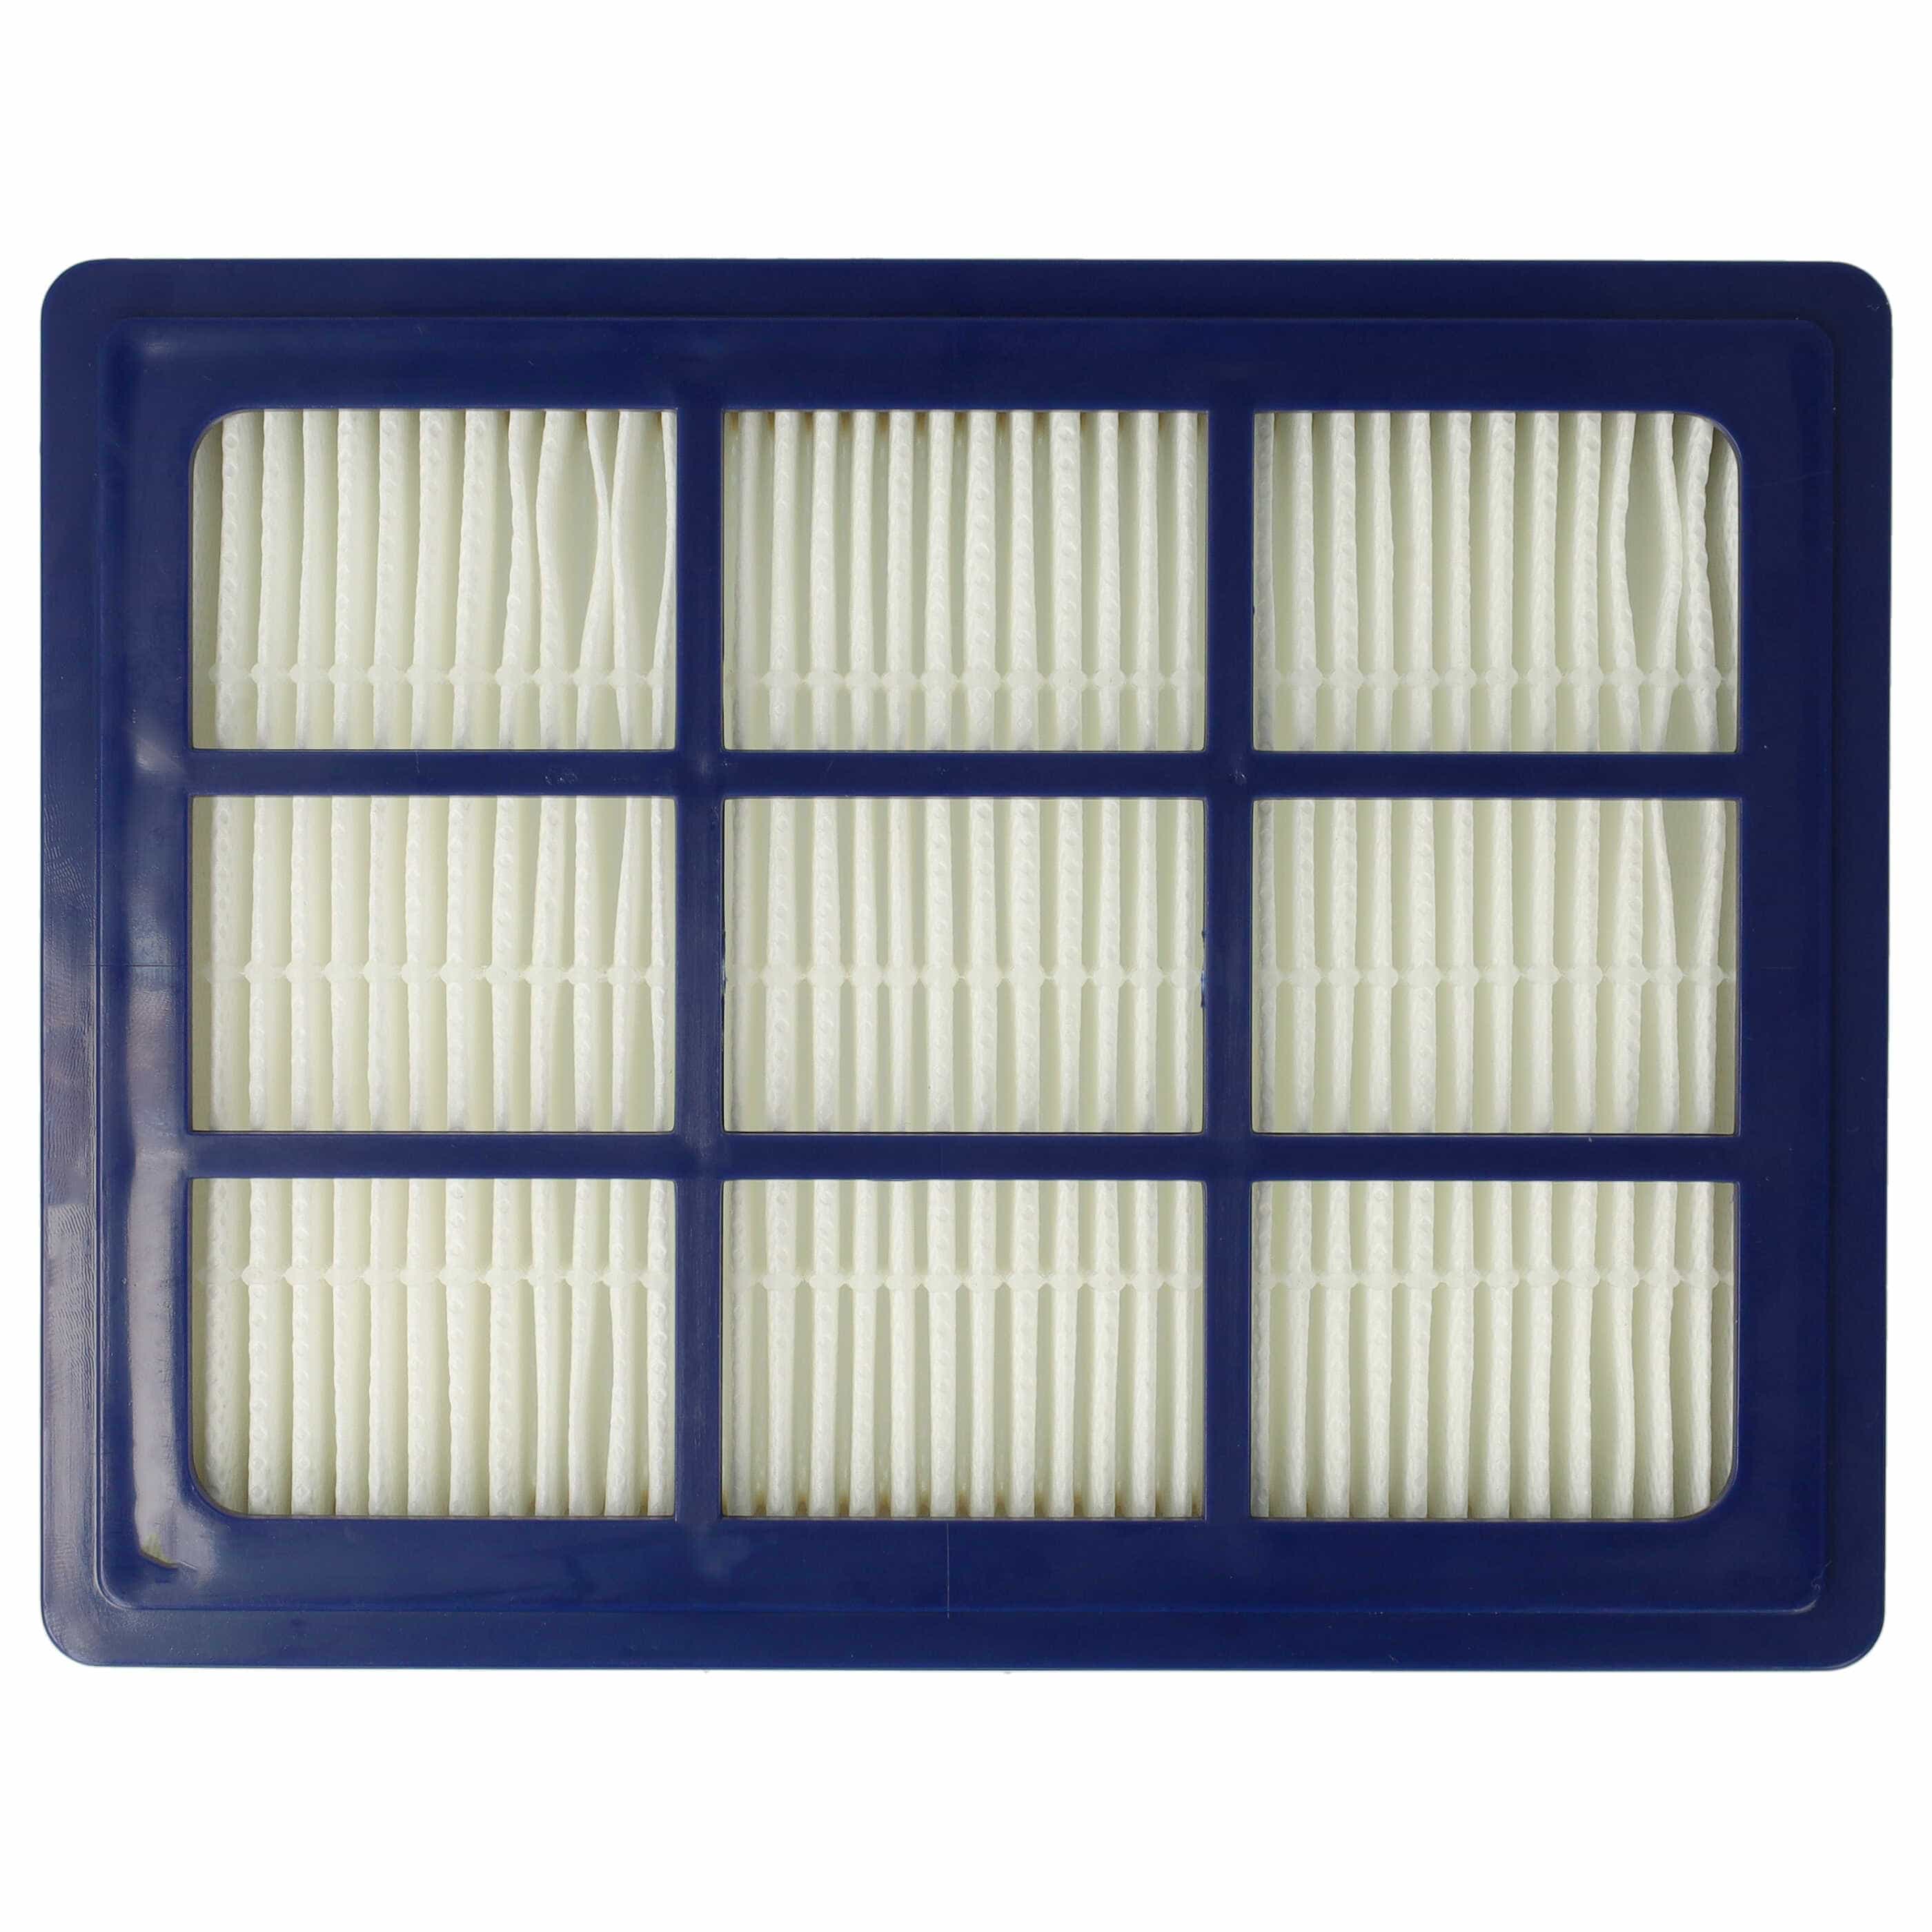 1x HEPA filter replaces Nilfisk 147 0432 500 for Grundig Vacuum Cleaner, filter class H12